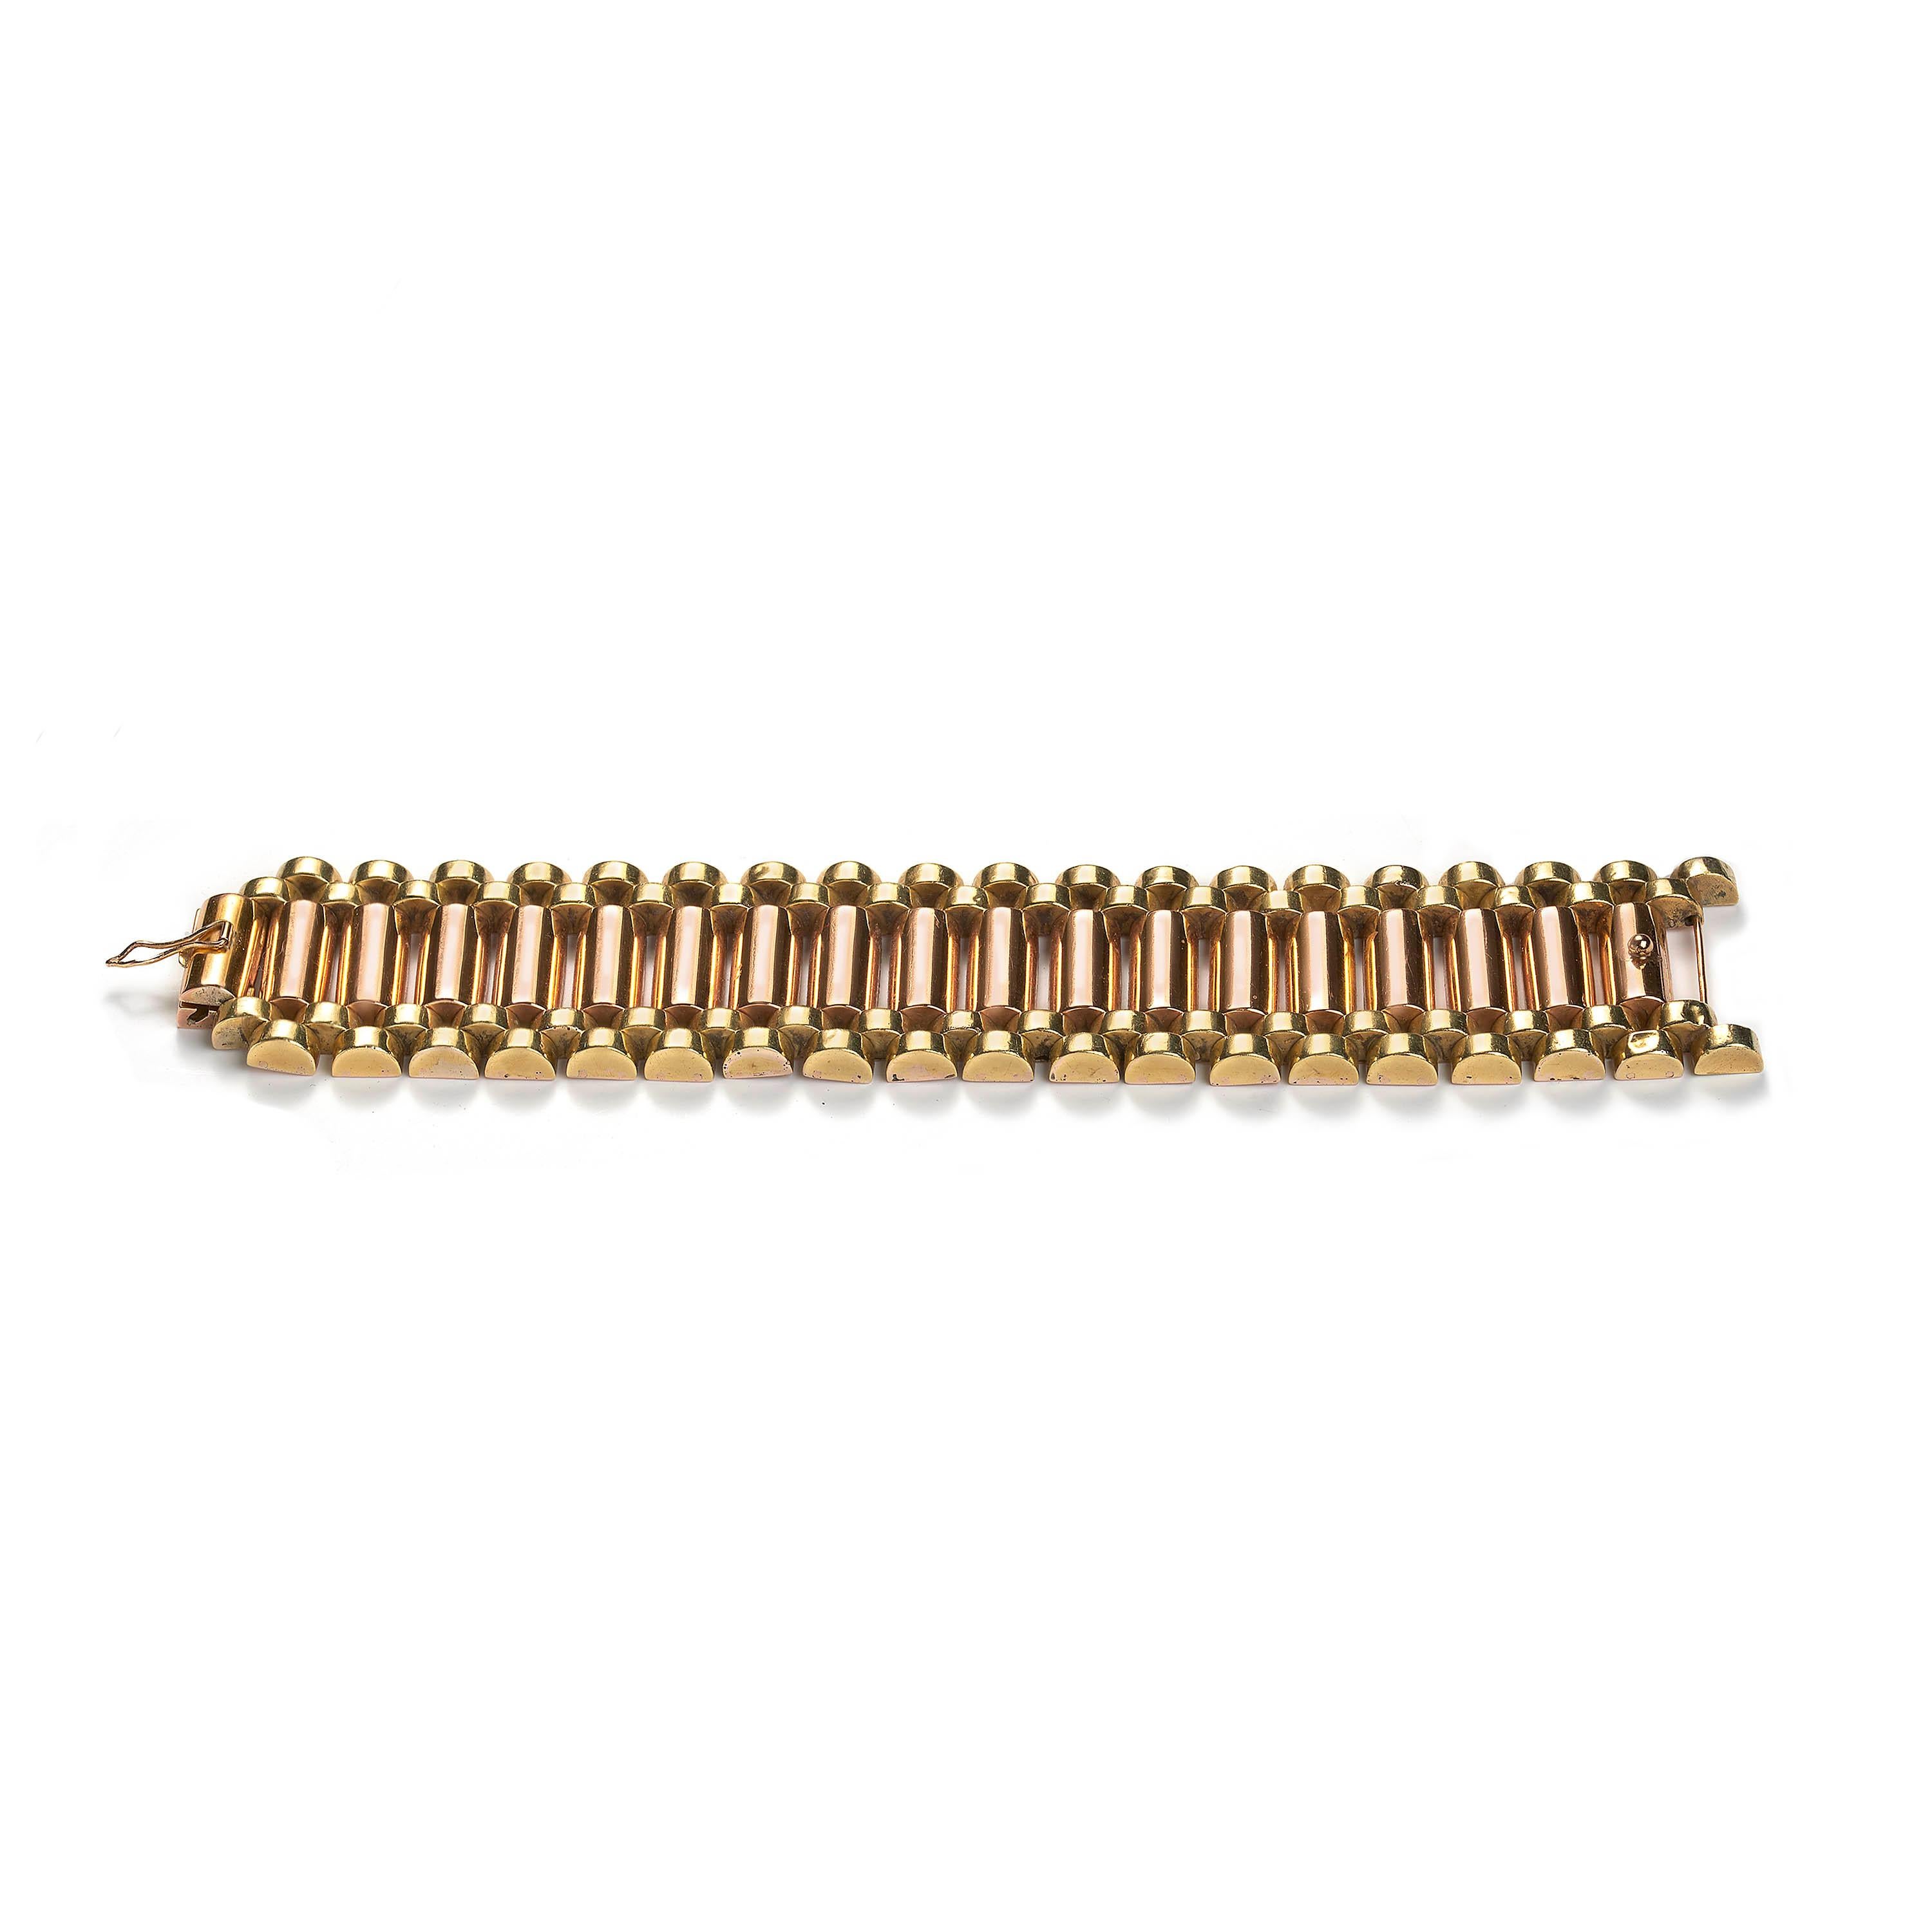 A vintage gold bracelet, consisting of a central row of rose gold cylindrical links, flanked by yellow gold, cylindrical brick-style links to either side, all mounted in 18ct gold. Circa 1940.